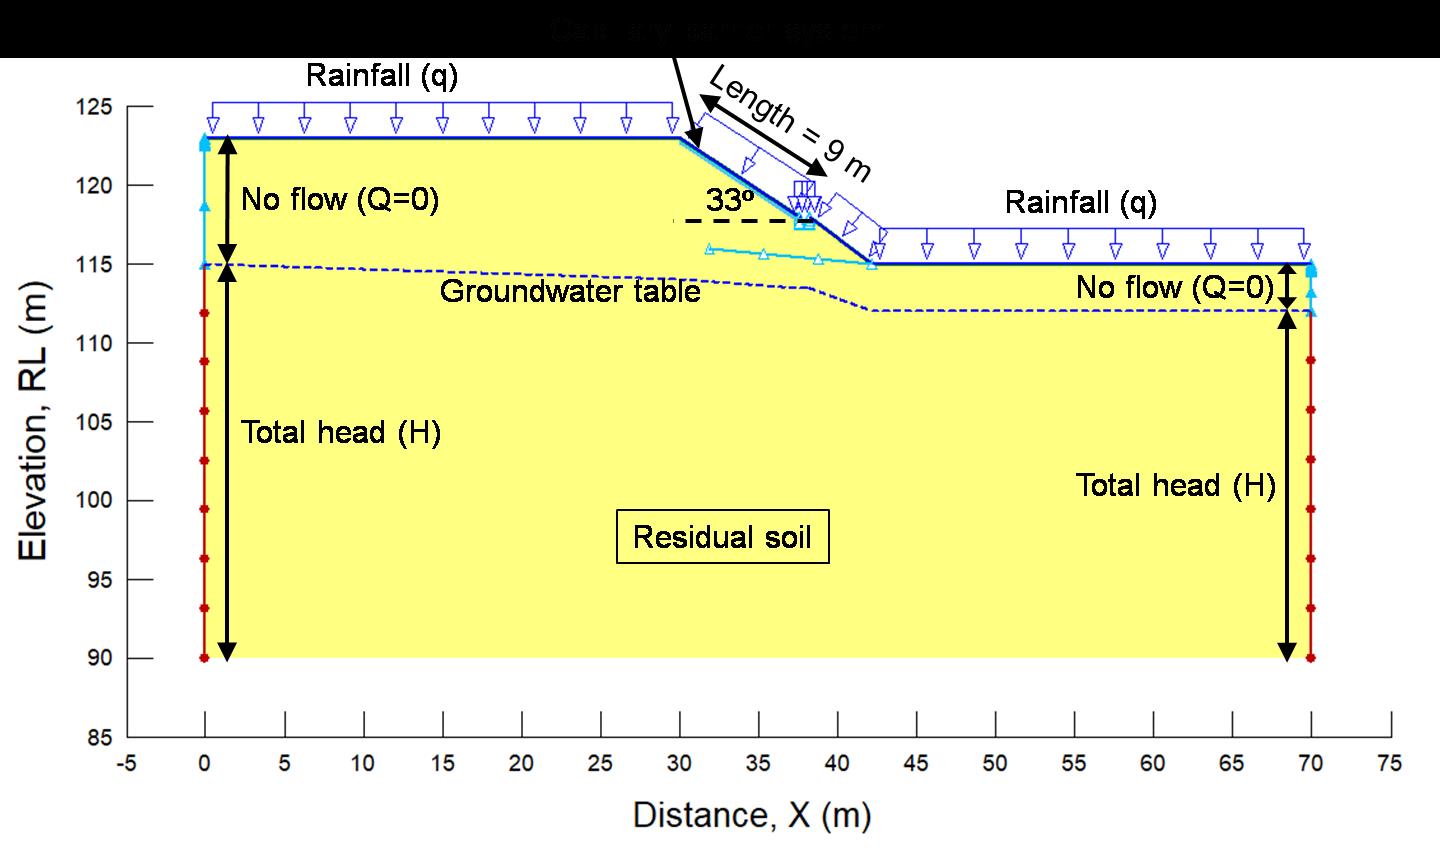 Numerical Simulation of Capillary Barrier System under Rainfall Infiltration in Singapore